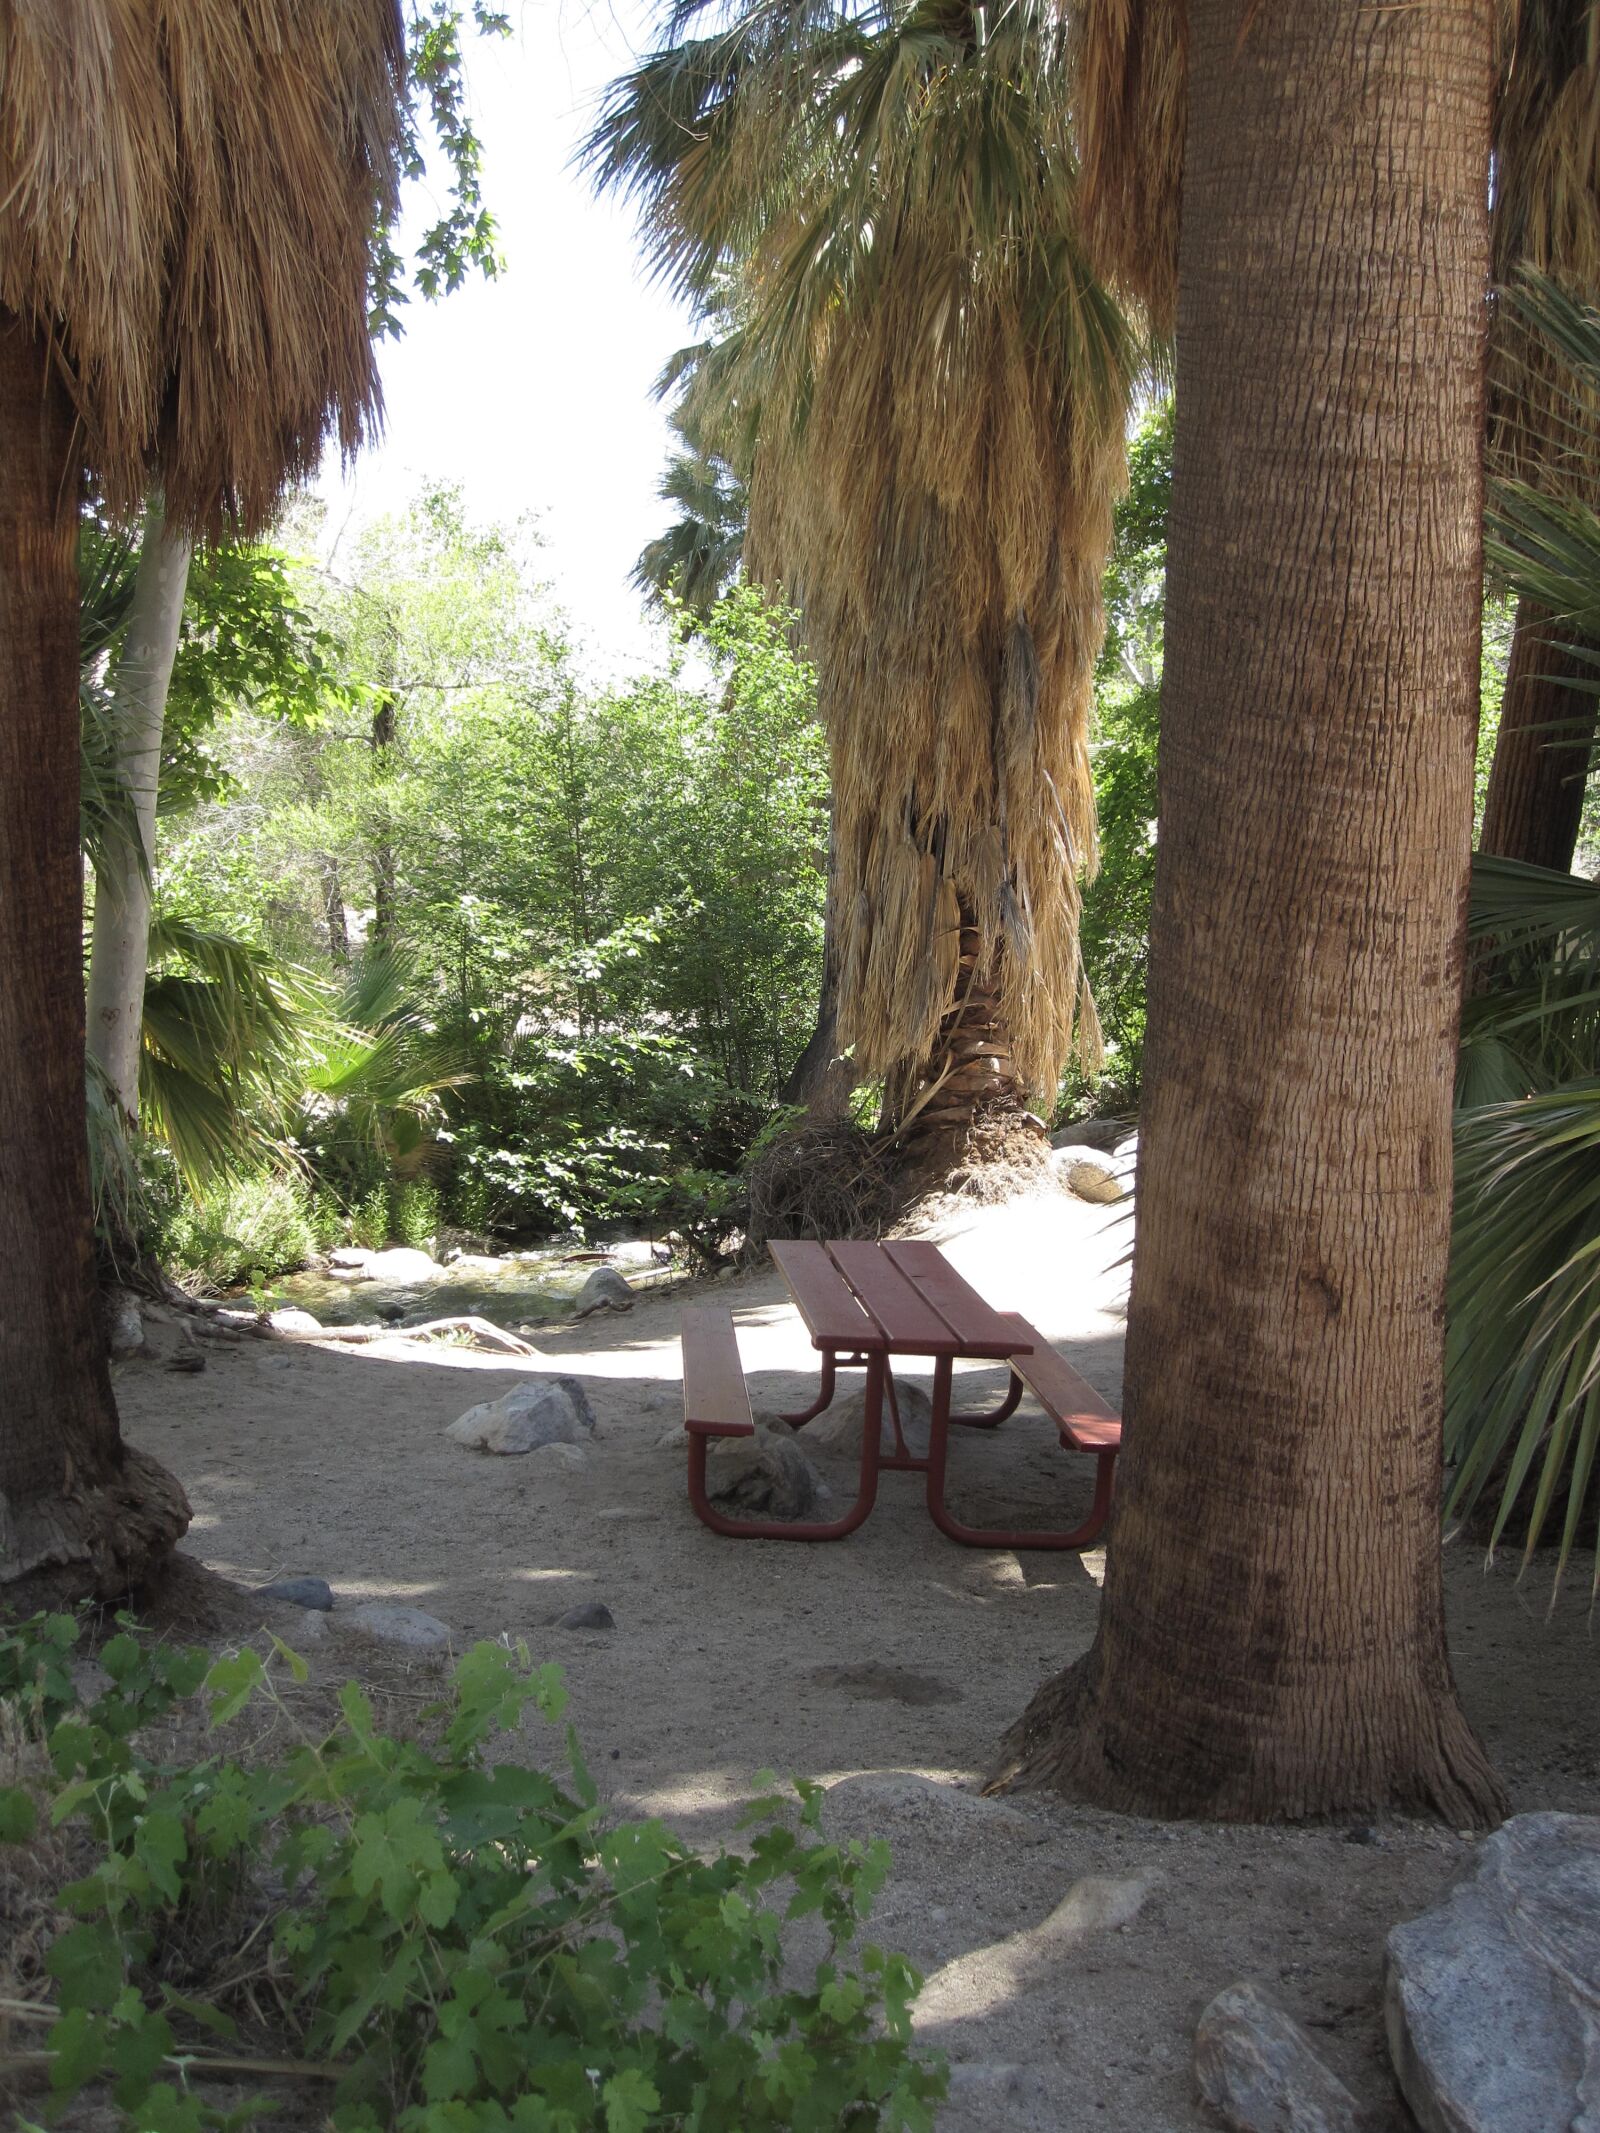 Canon PowerShot SD780 IS (Digital IXUS 100 IS / IXY Digital 210 IS) sample photo. Palm trees, hike, landscape photography